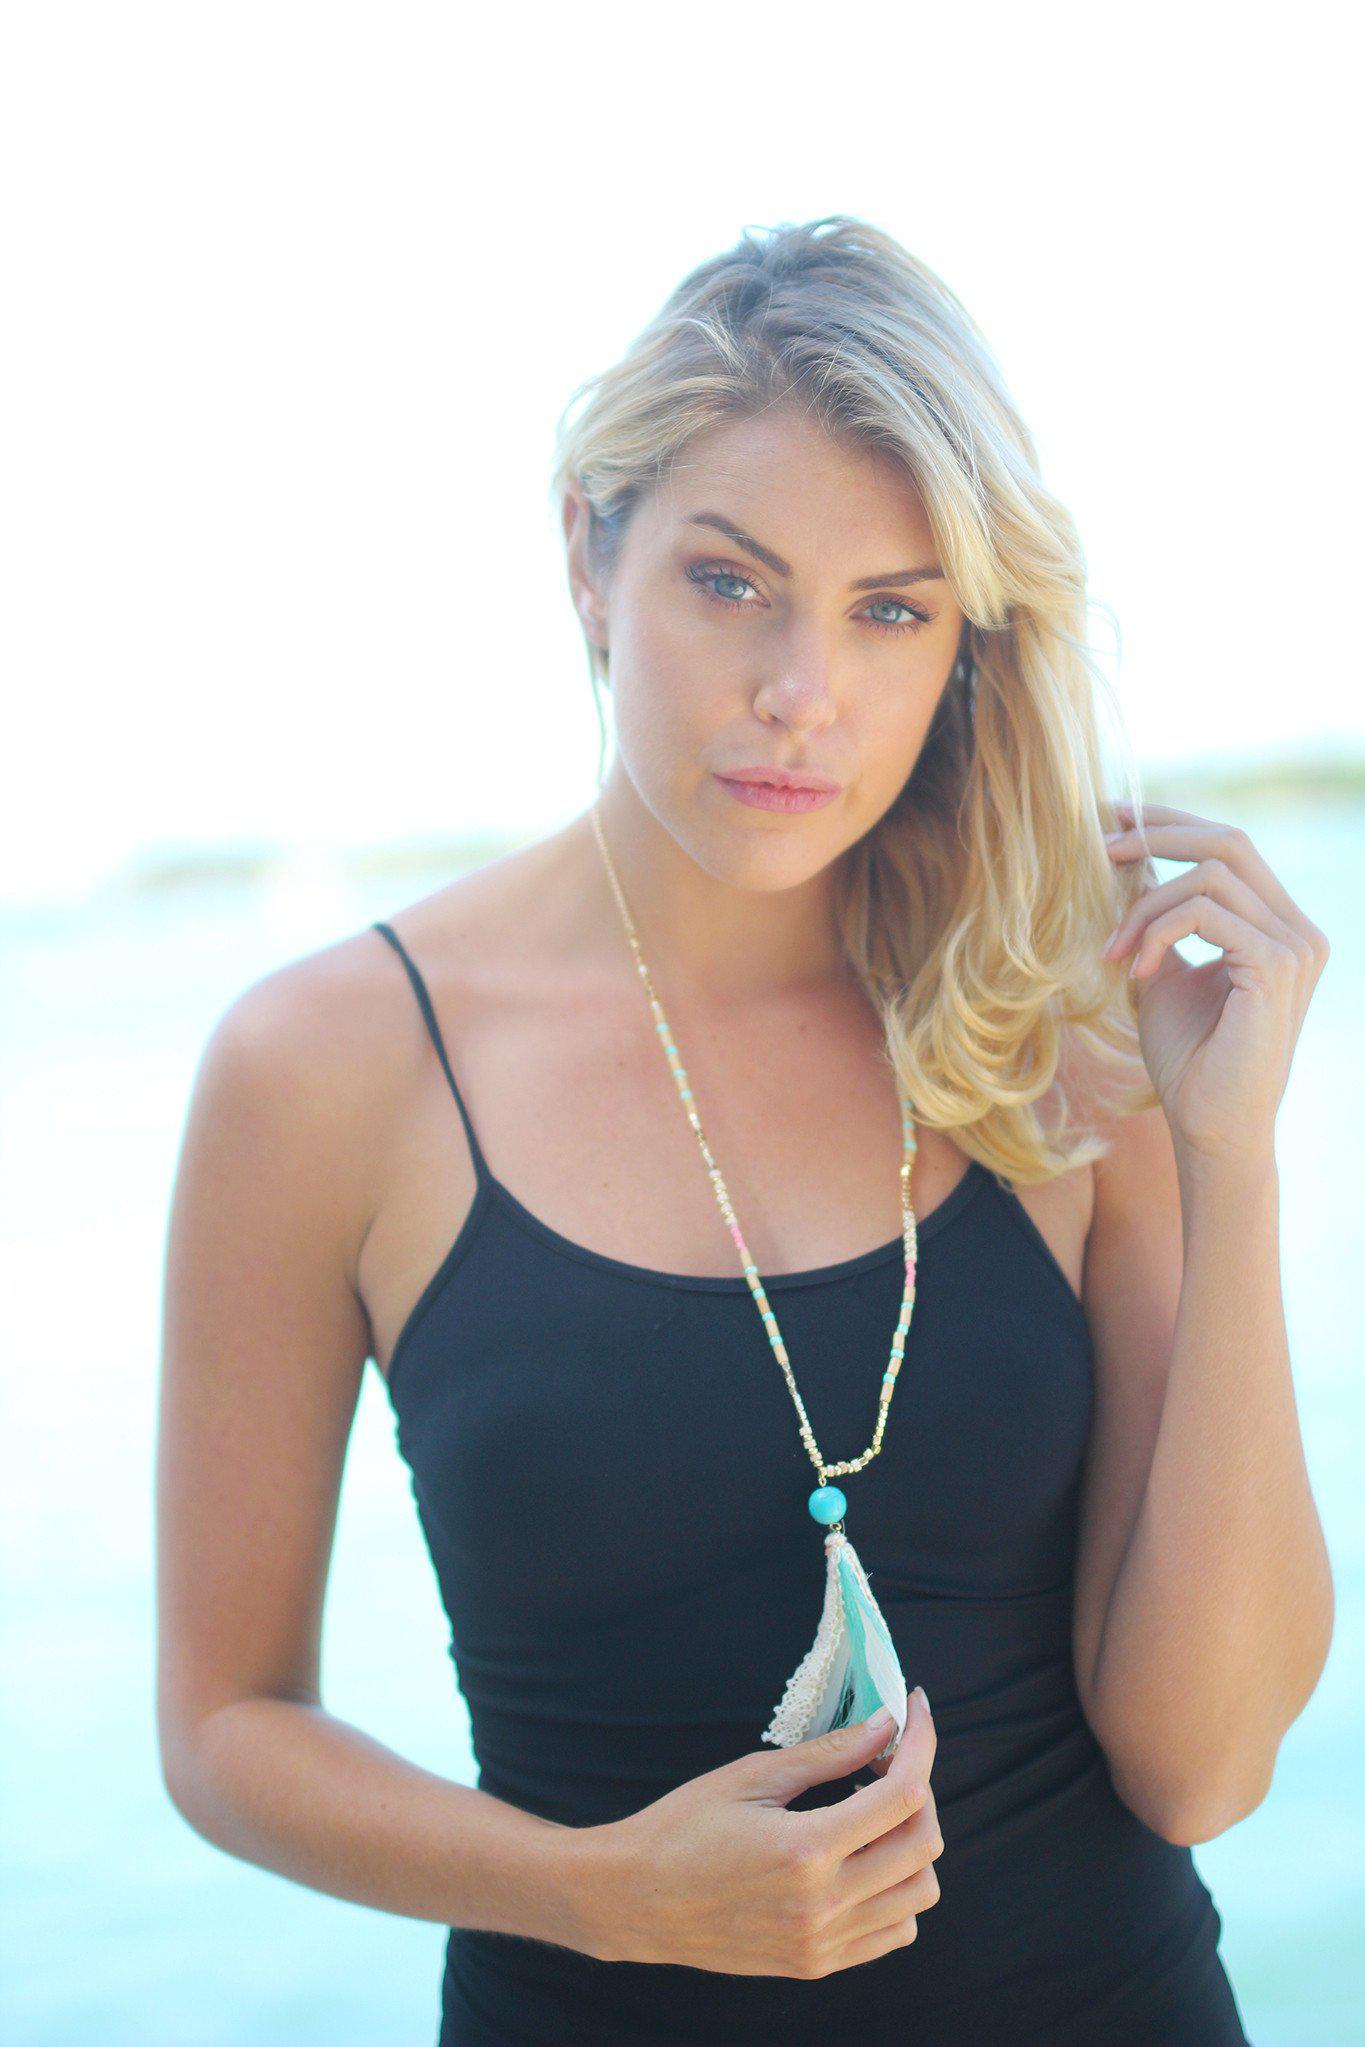 Mint Wooded Tassel Necklace